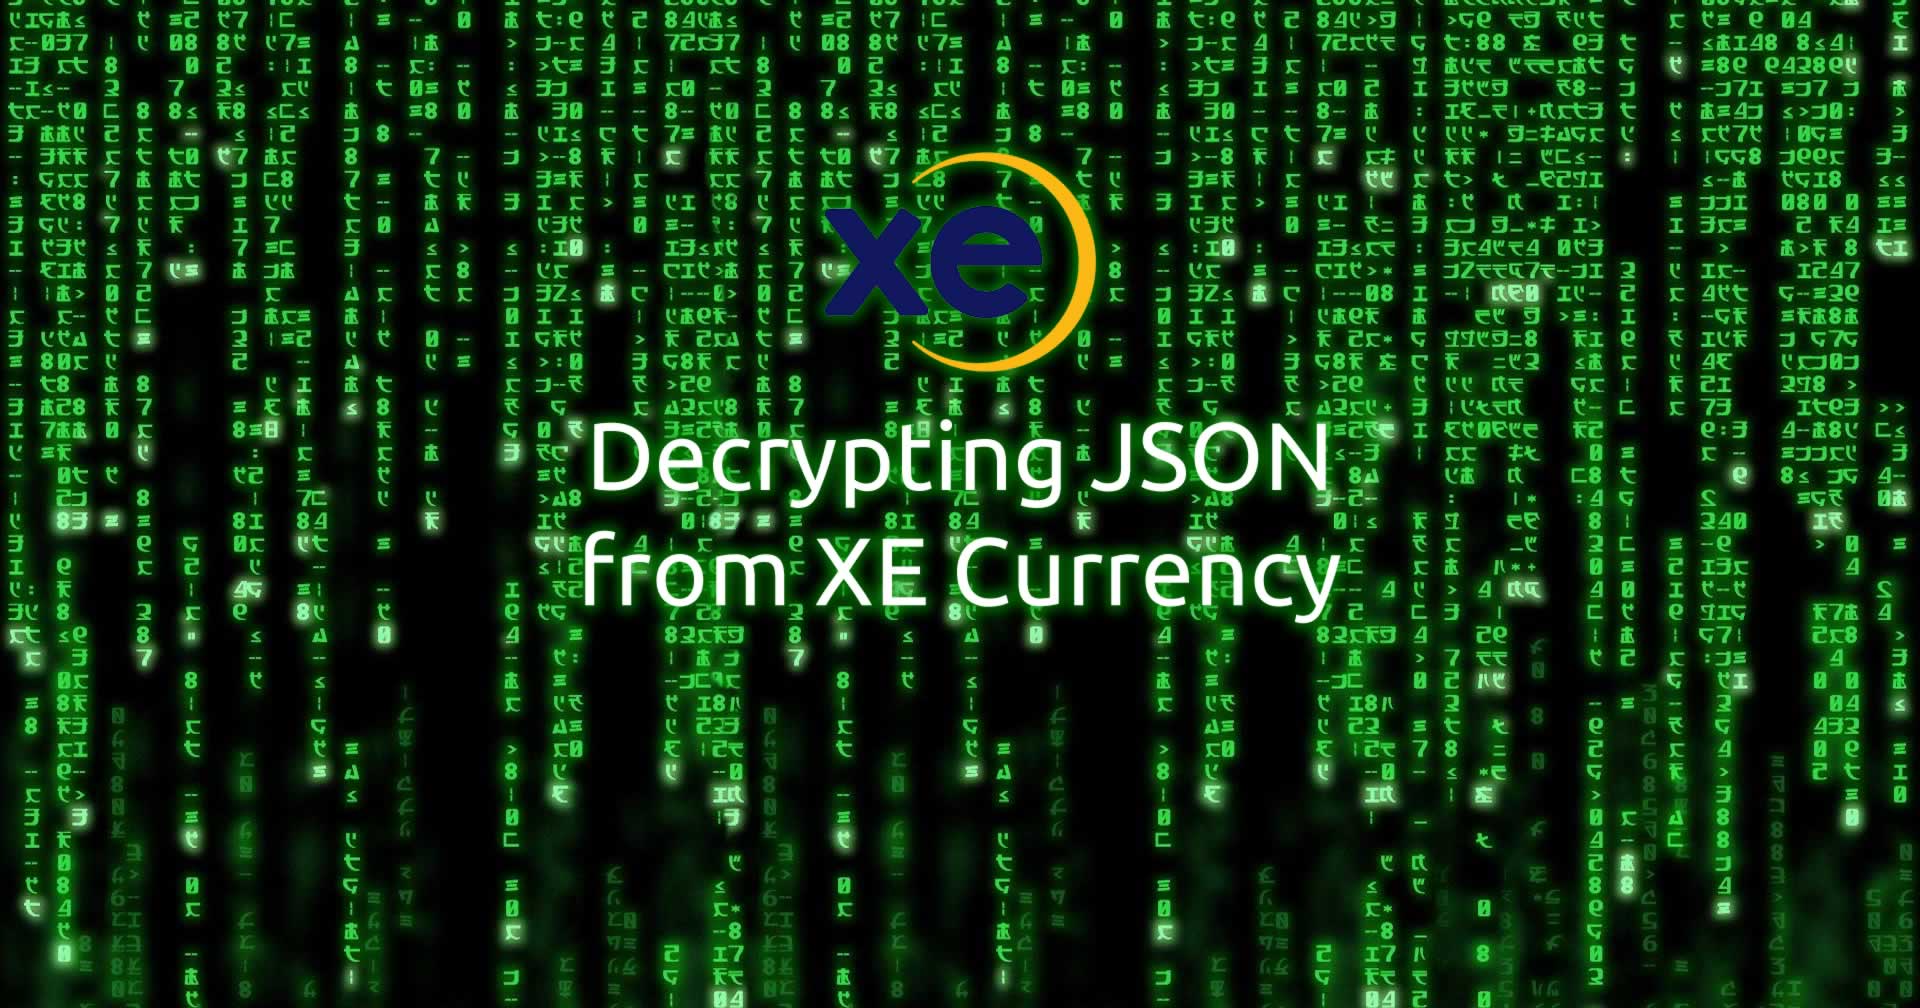 Decrypting JSON from XE Currency